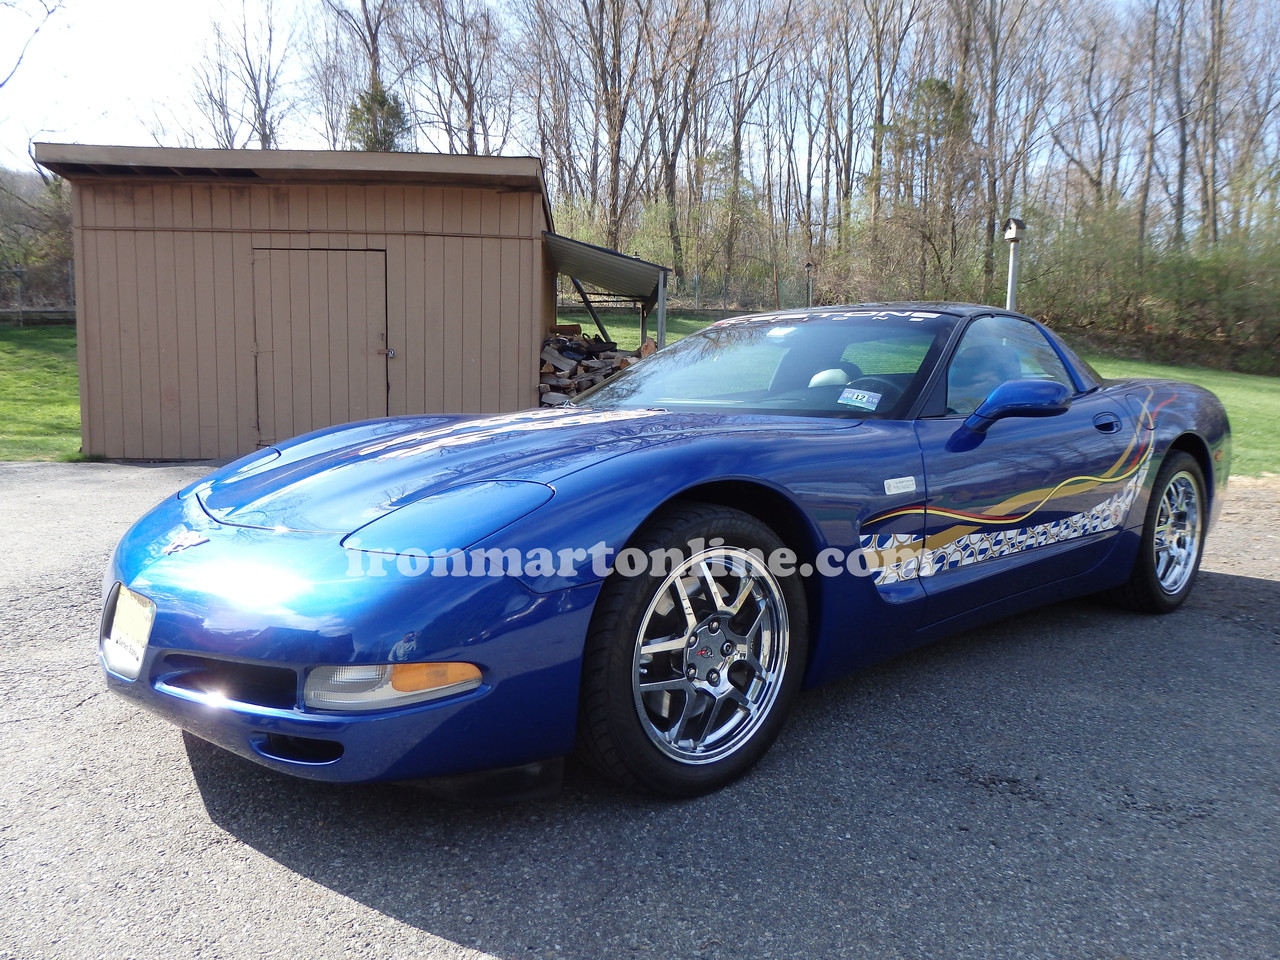 50th Anniversary Corvette For Sale,Gin Rummy Card Game 2 Players